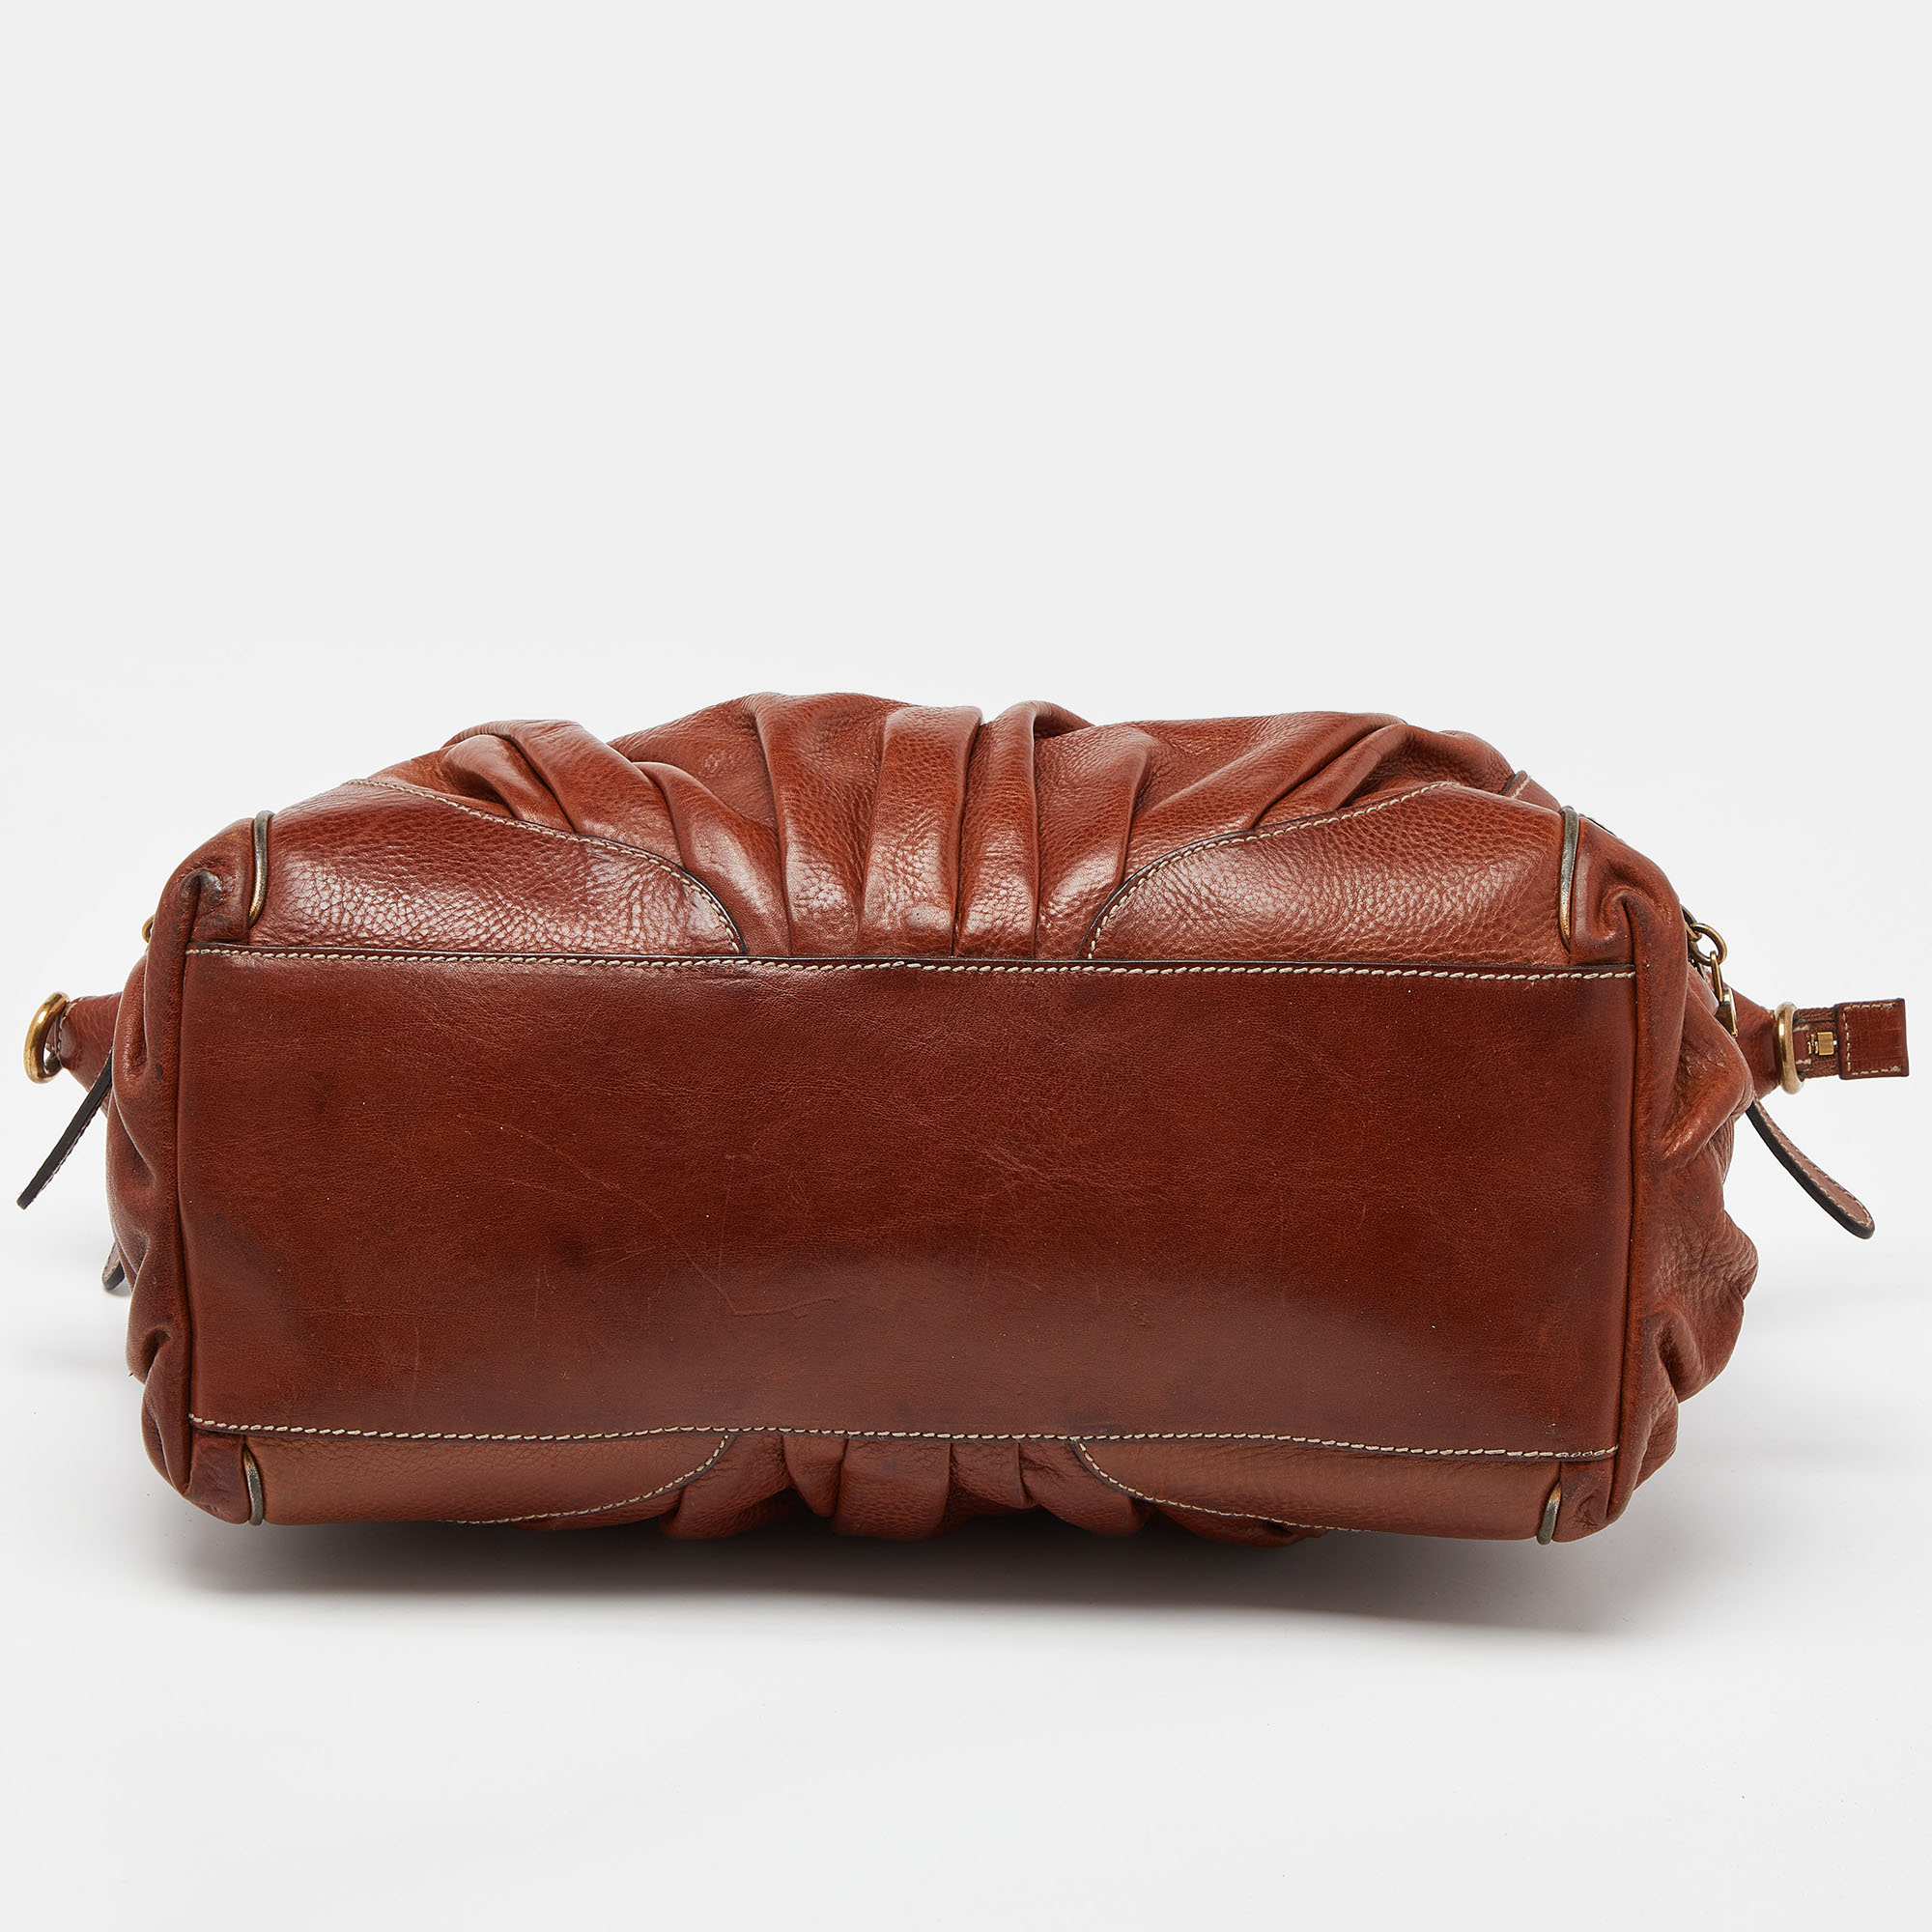 Dolce & Gabbana Brown Leather And Calfhair Satchel